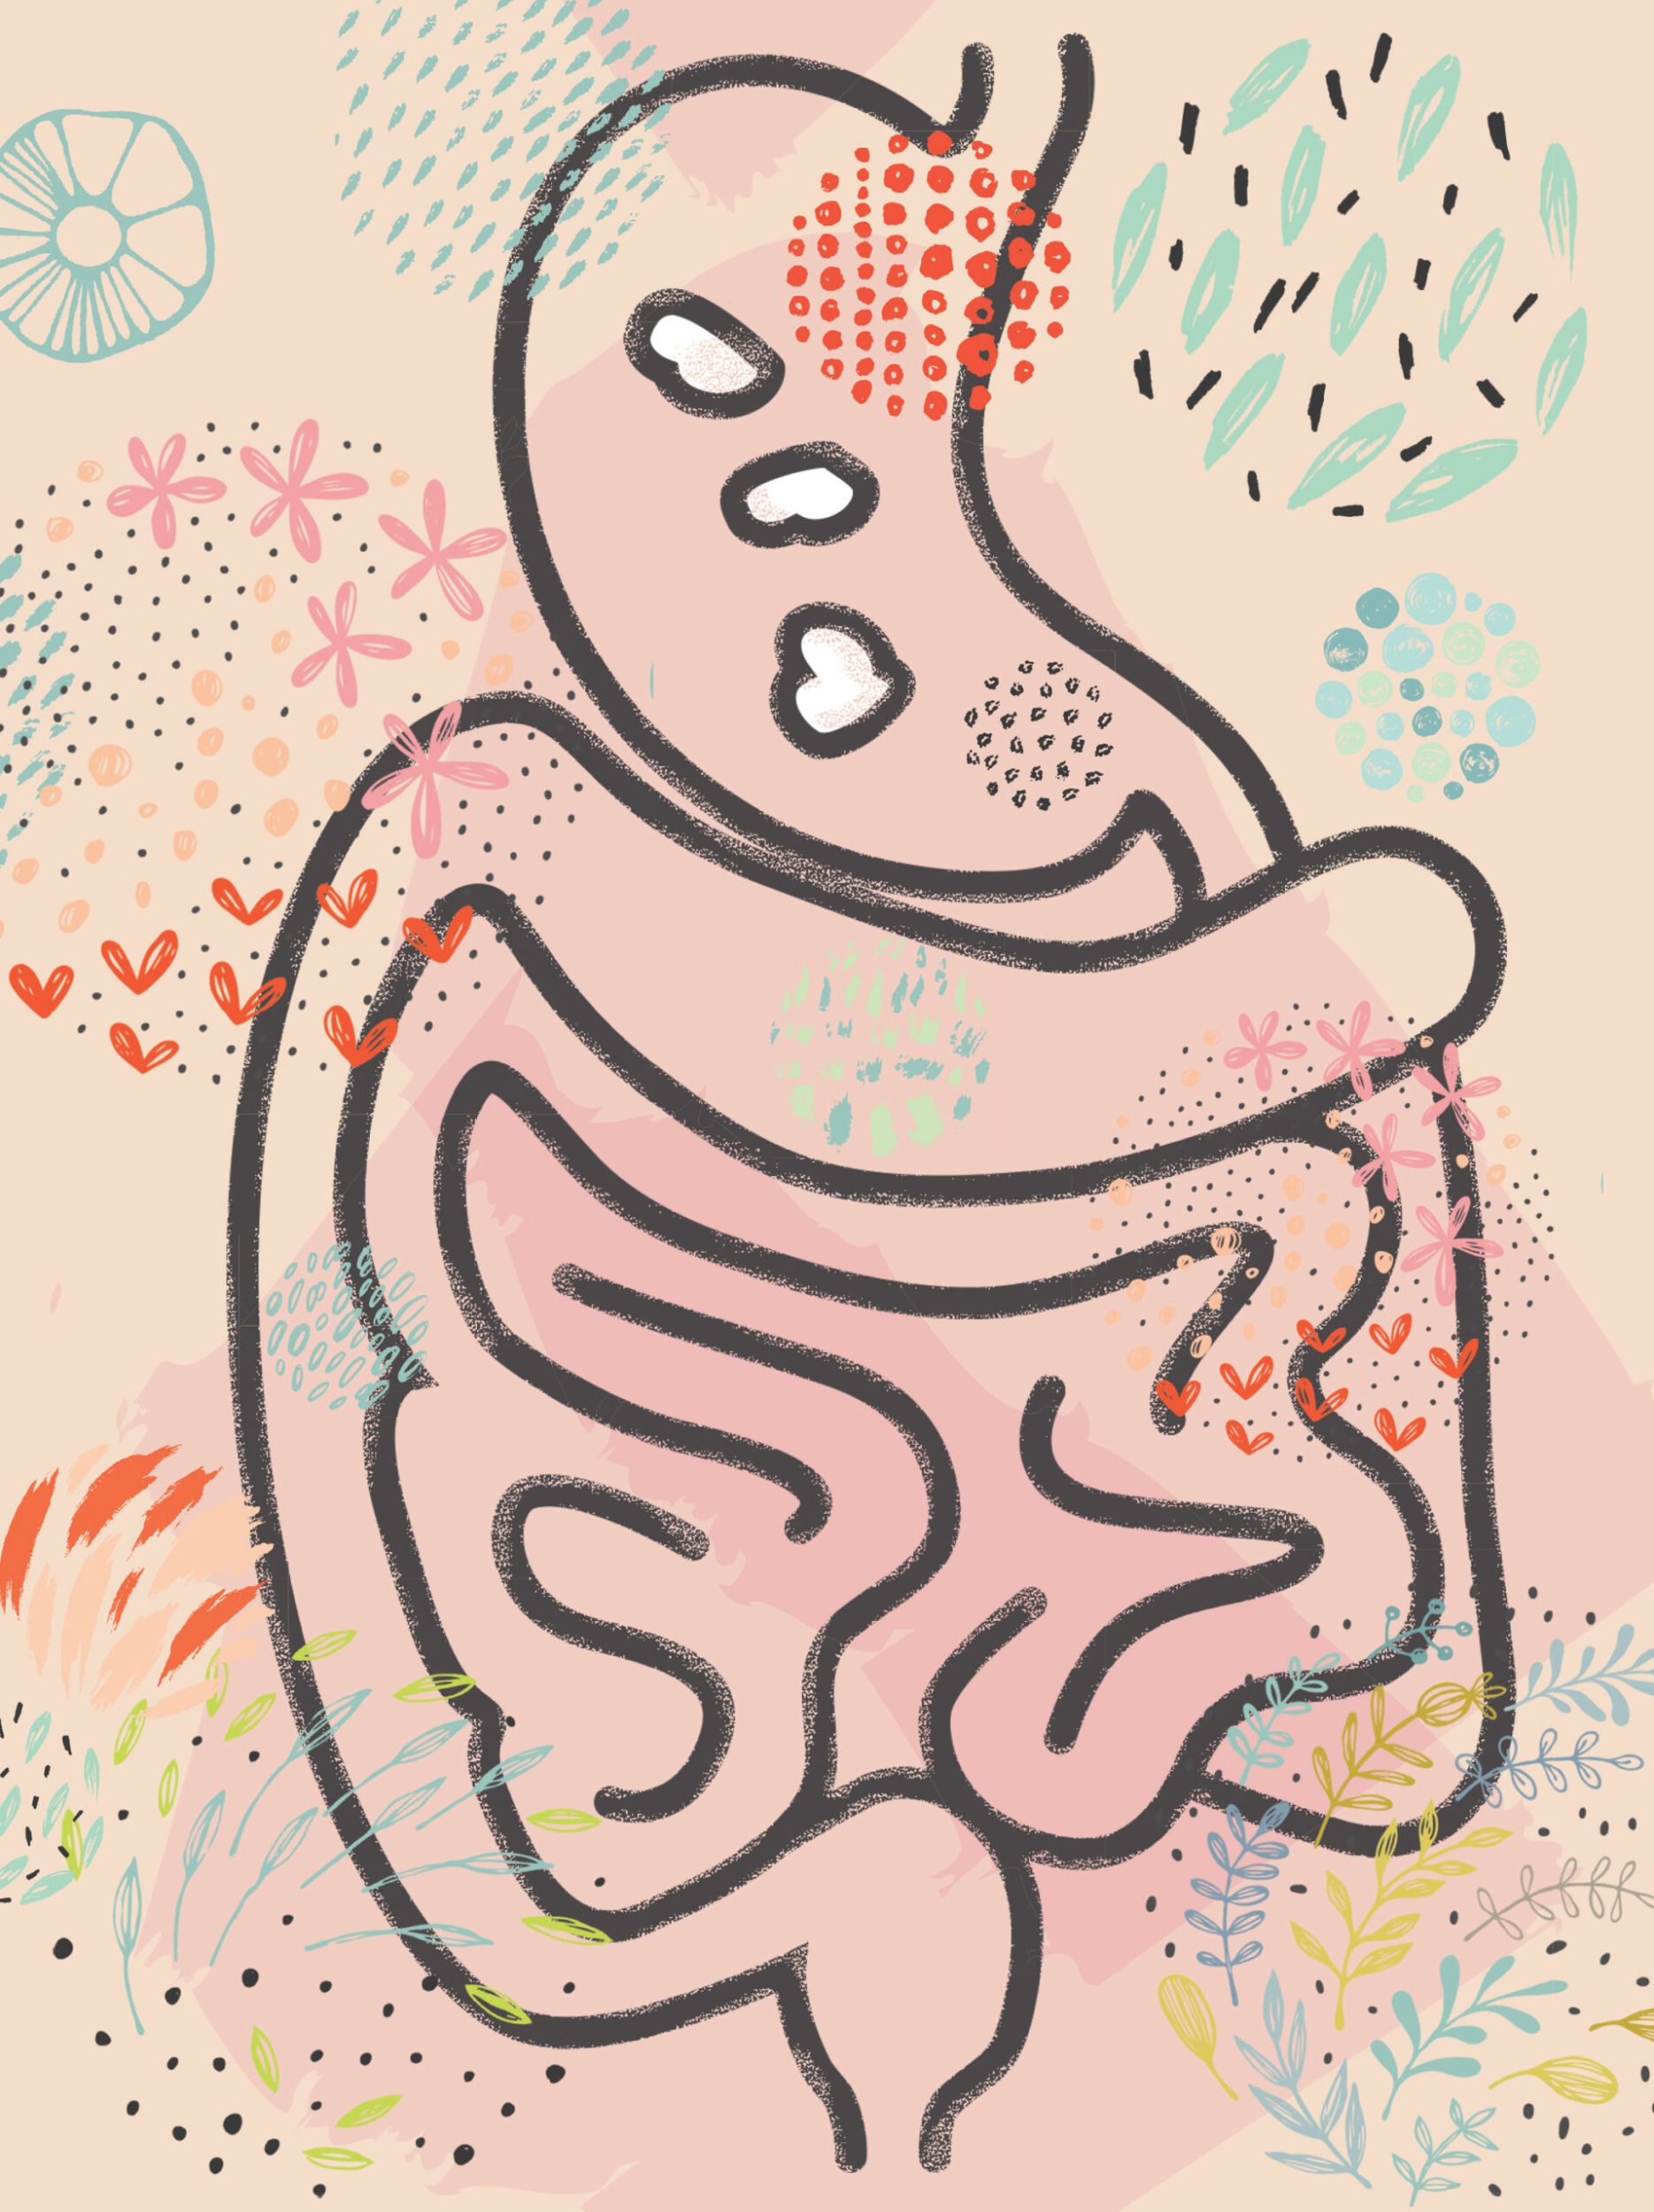 Illustration of an intestine surrounded by drawings of flowers, hearts and leaves 